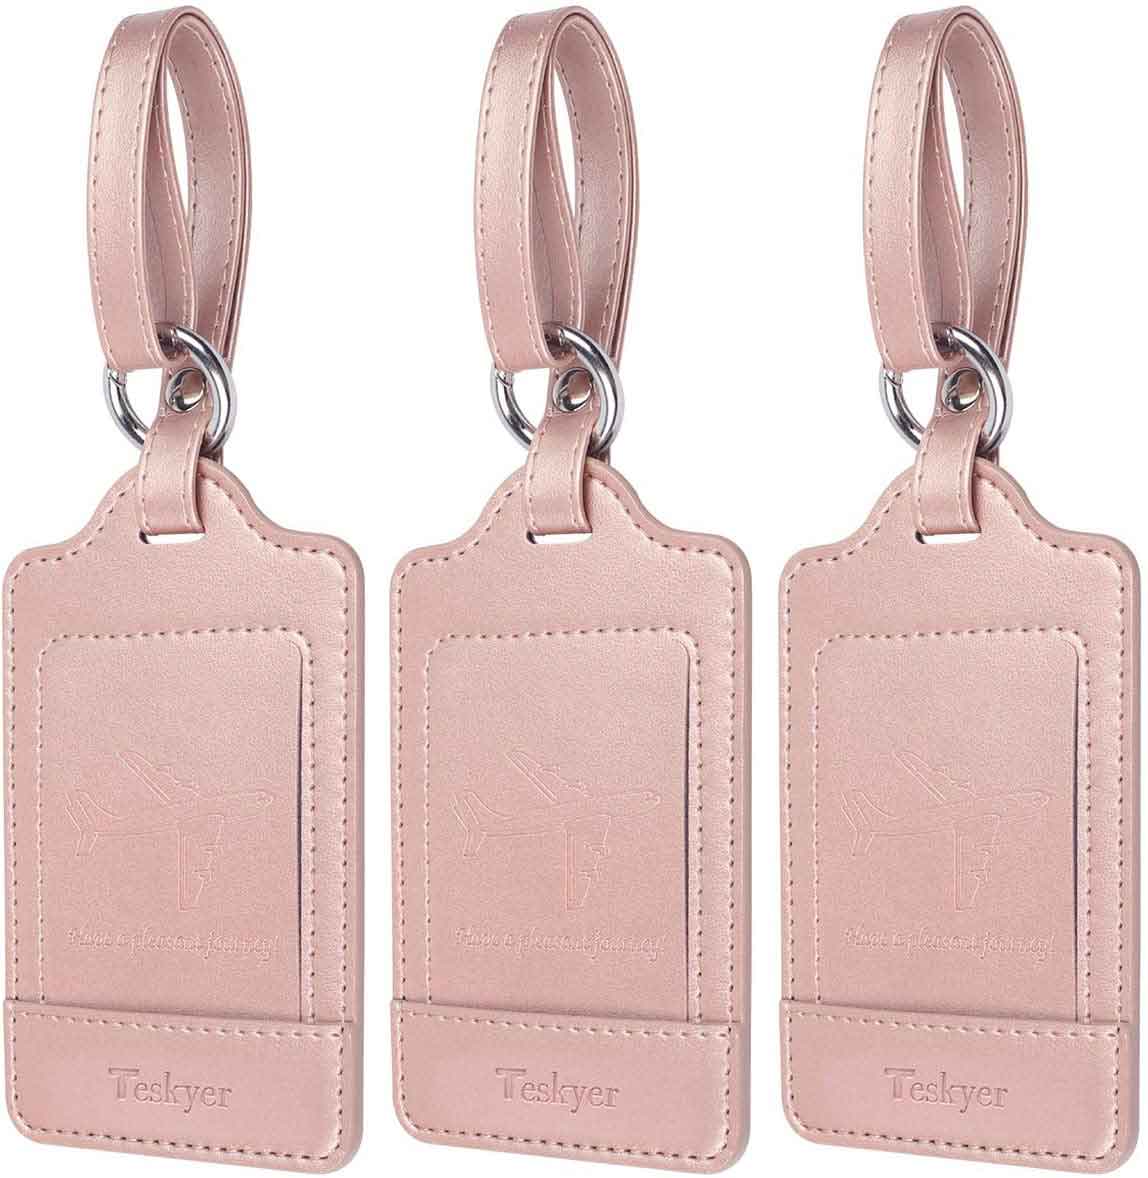 Skycase Luggage Tags, 2 Pack Premium PU Leather Luggage Tags Privacy Protection Travel Bag Labels Suitcase Tags,Brown, Size: Medium